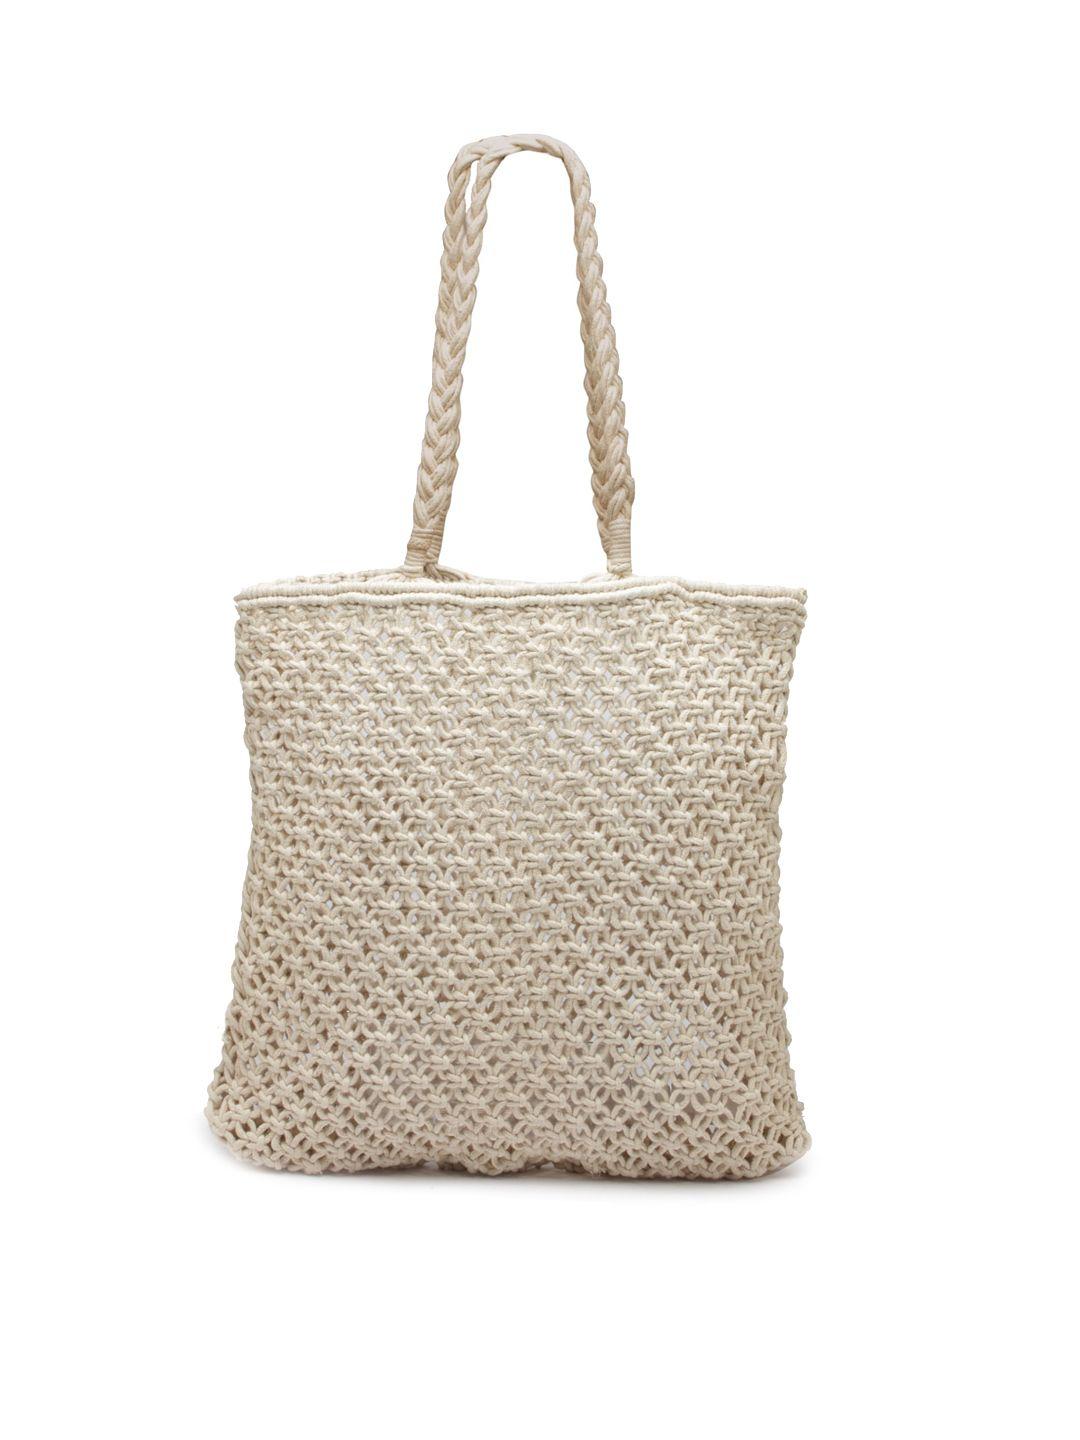 arrabi cream-coloured geometric textured oversized structured shoulder bag with cut work